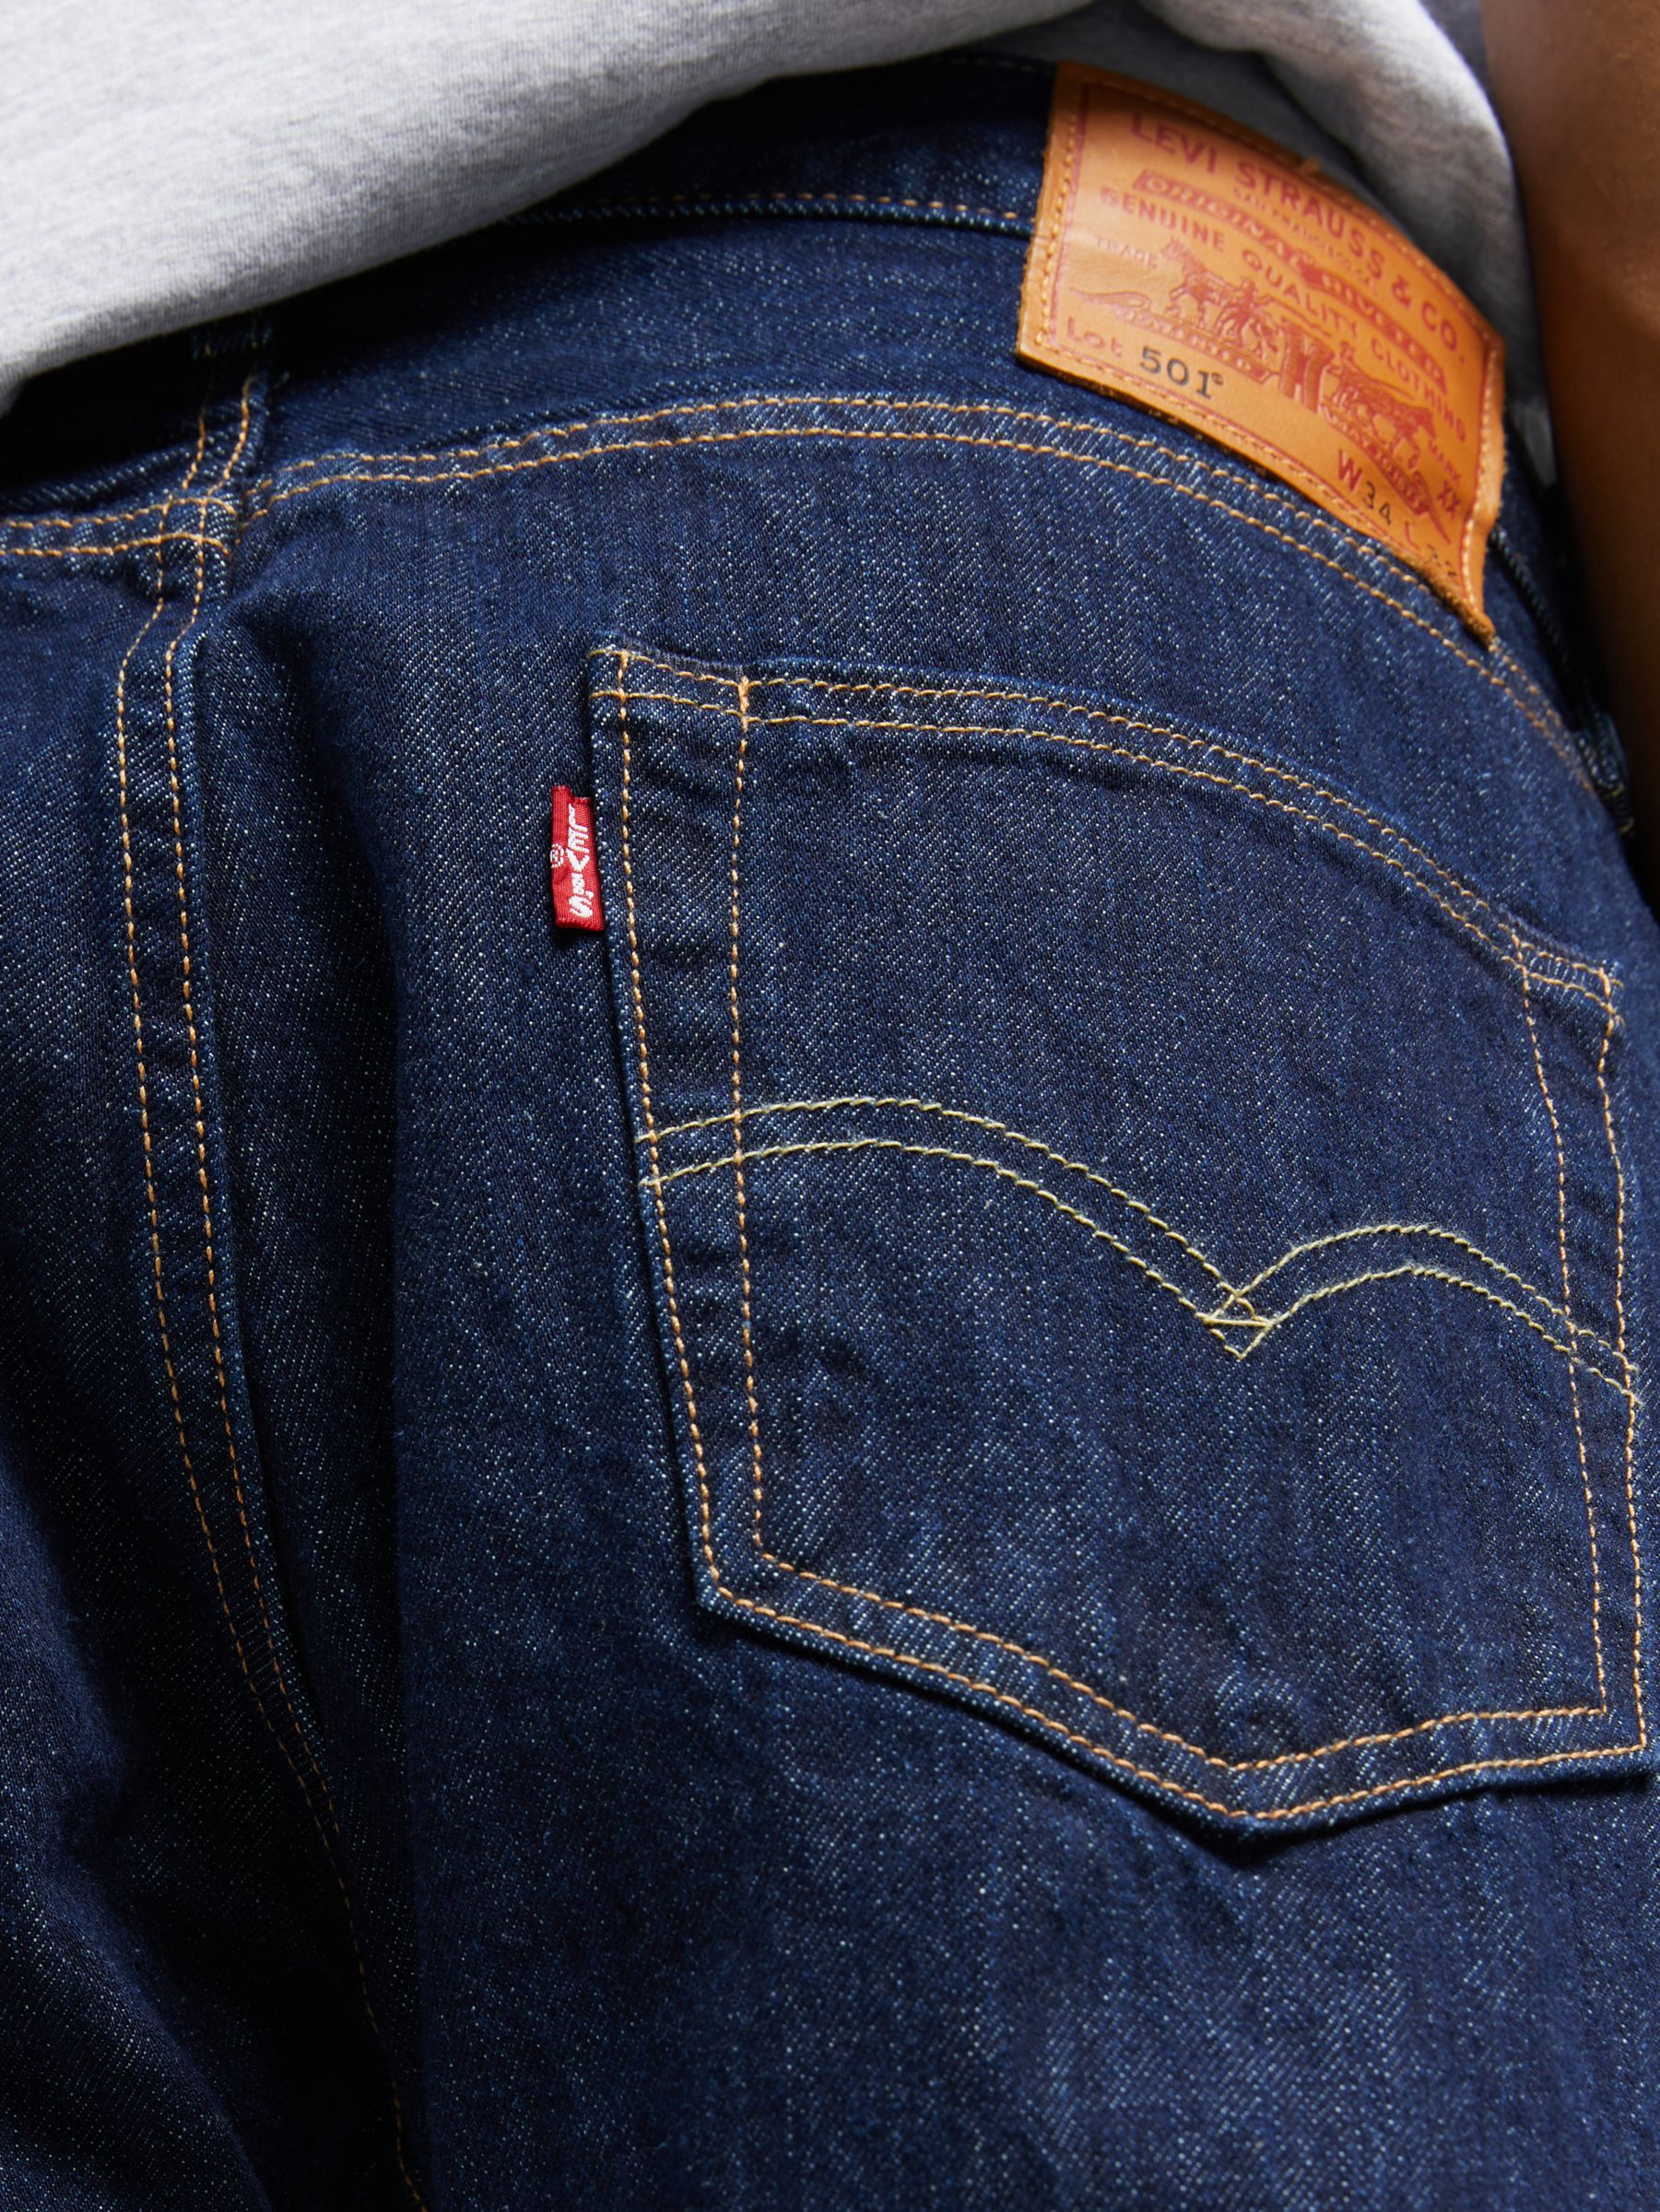 Buy Levi's 501 Straight Jeans, One Wash | John Lewis